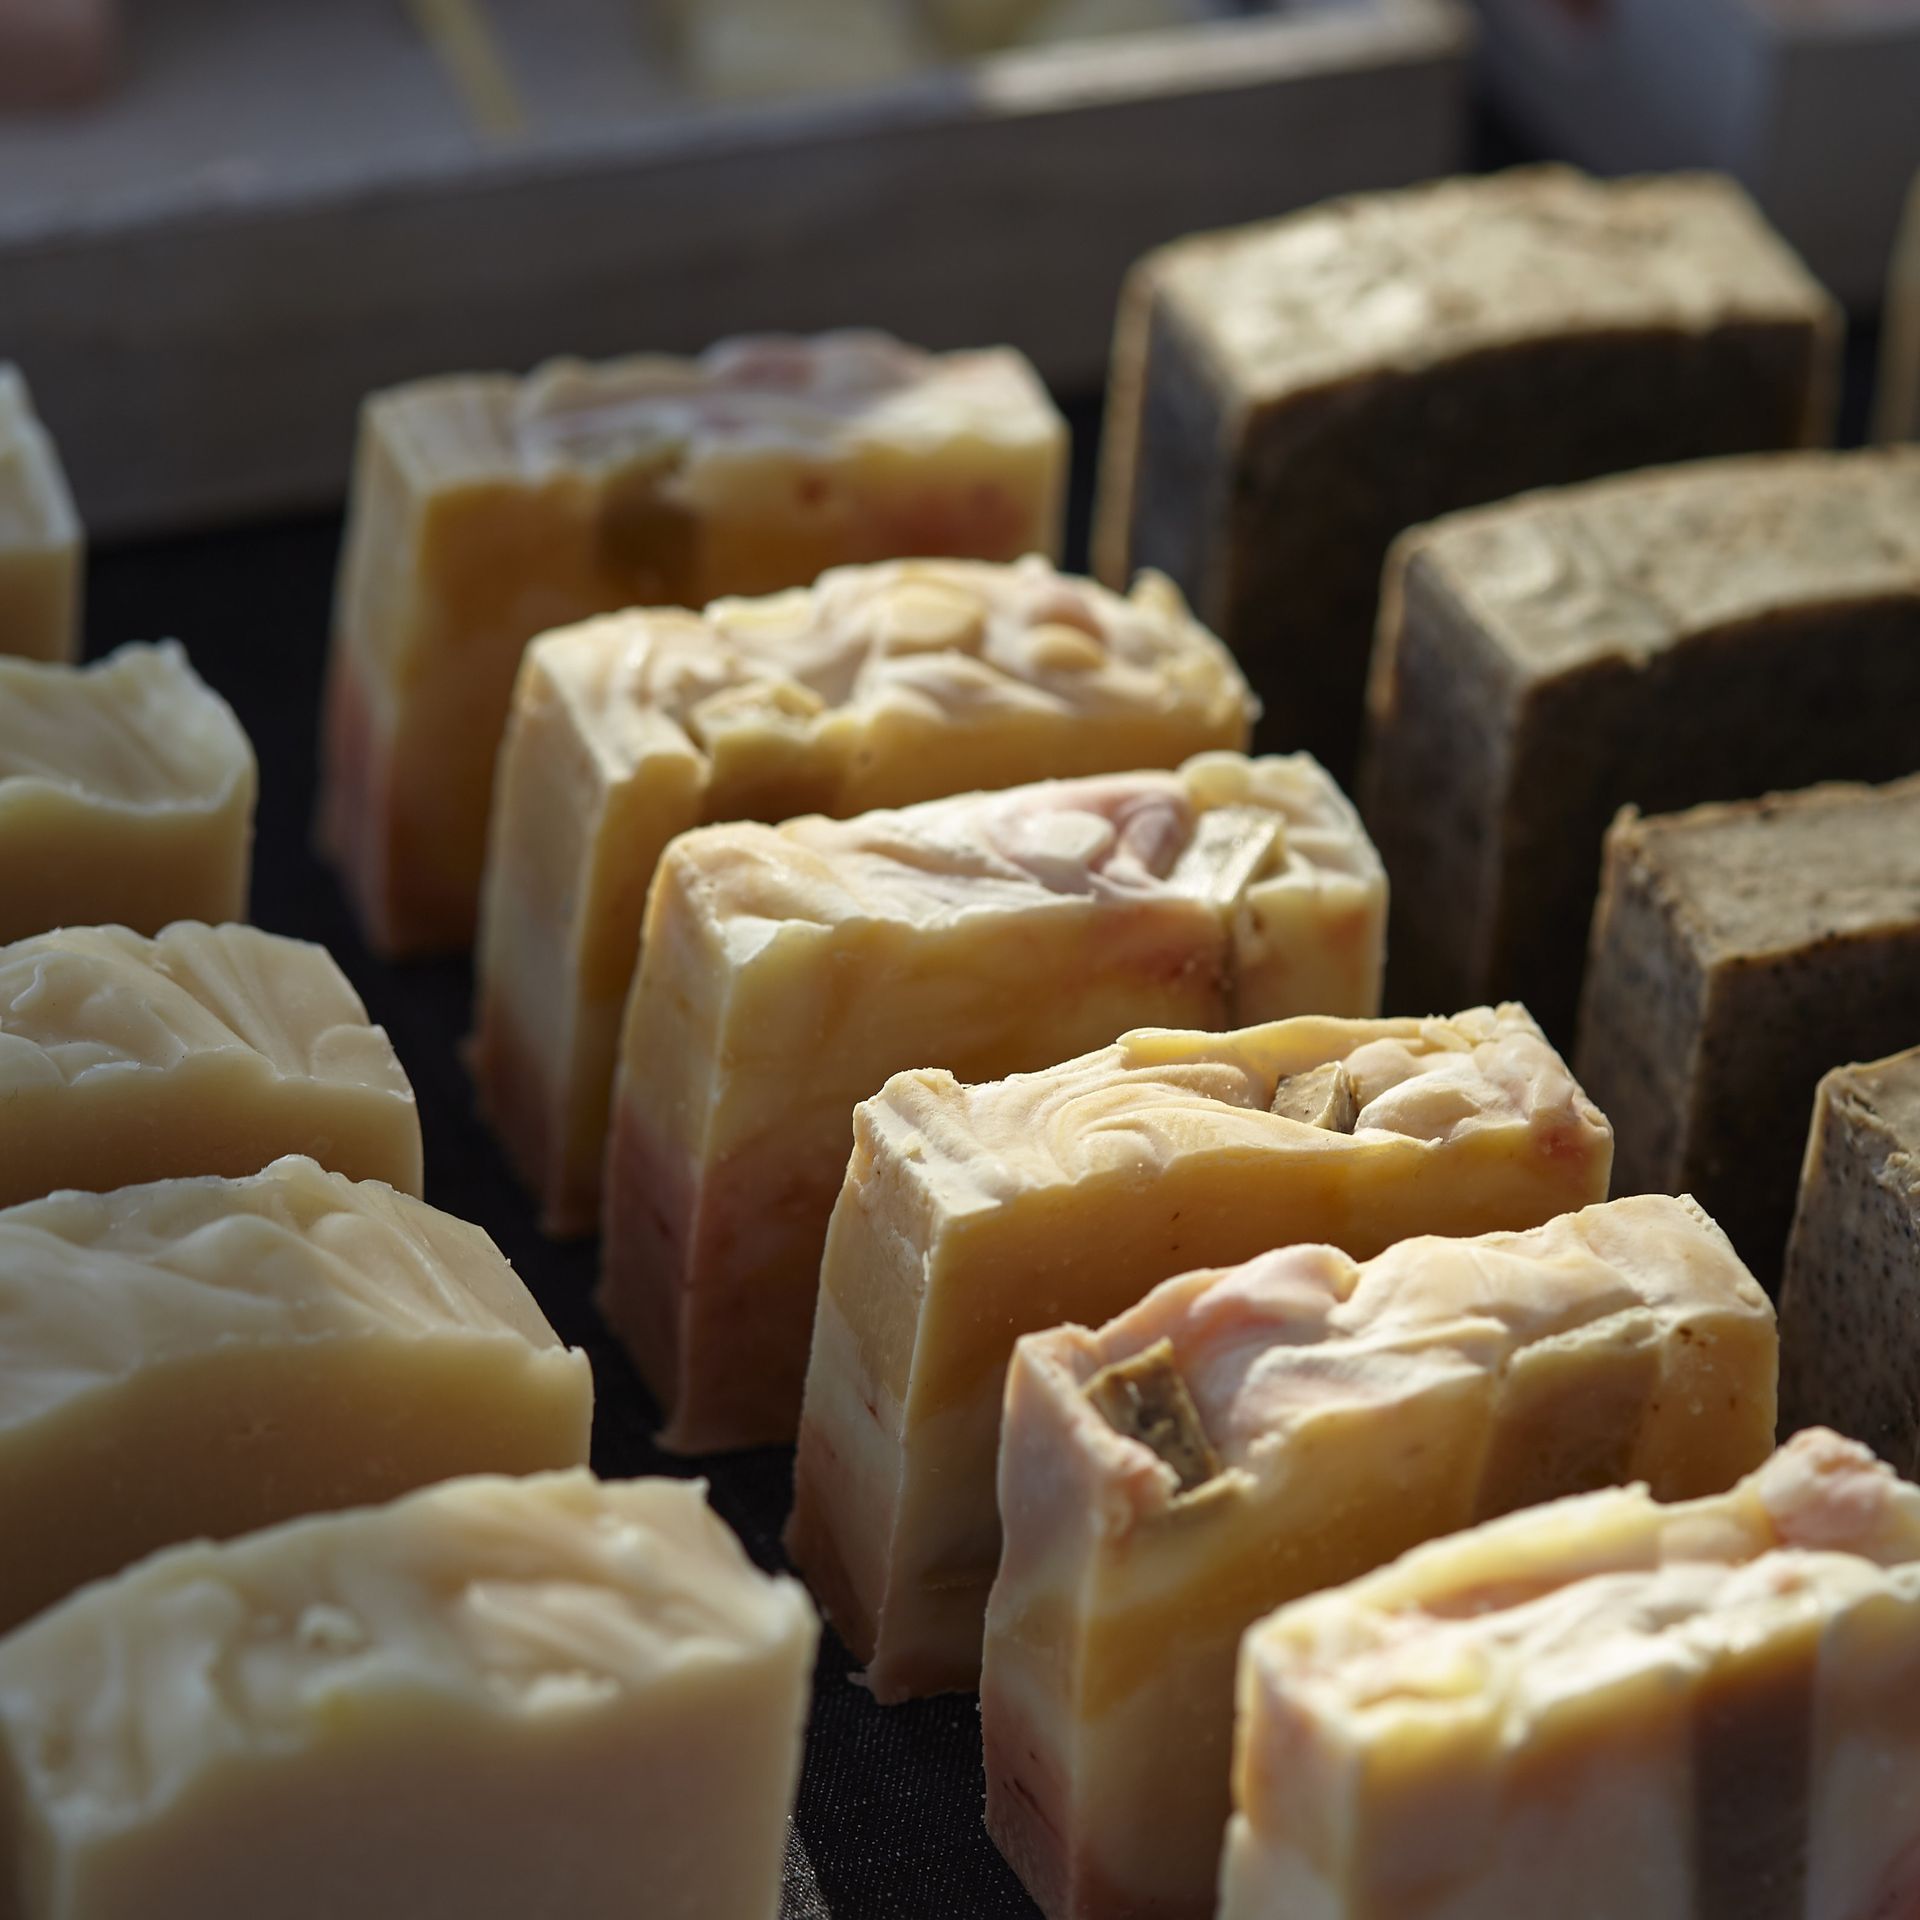 wildcrafted bars of soap